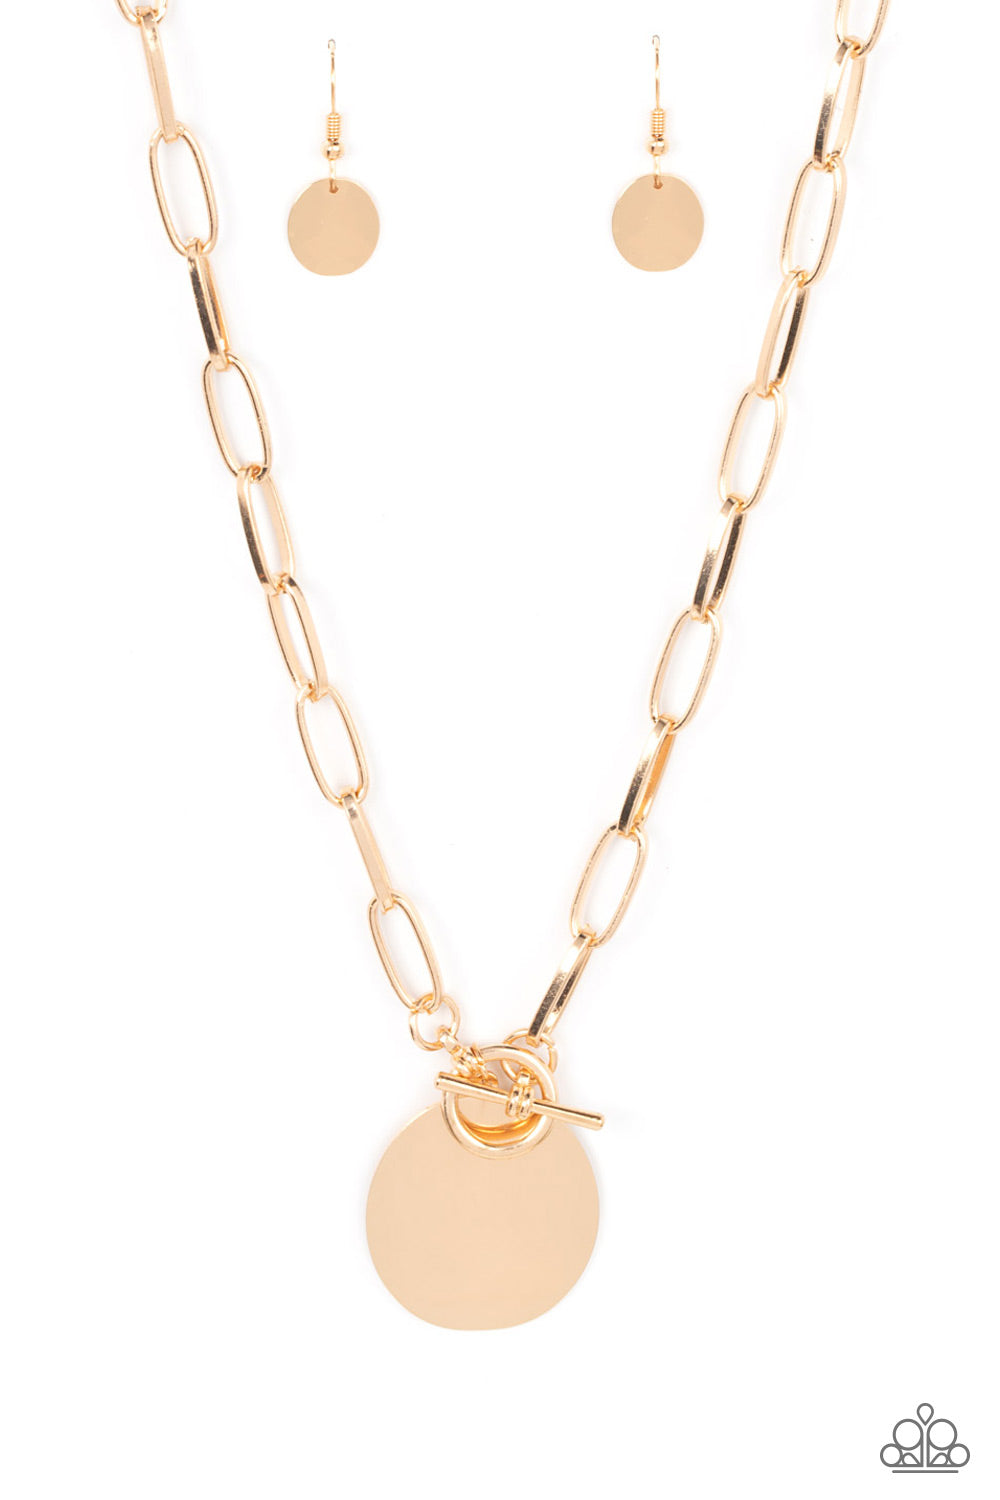 Paparazzi Accessories - Tag Out #N74 Box 1 - Gold Necklace